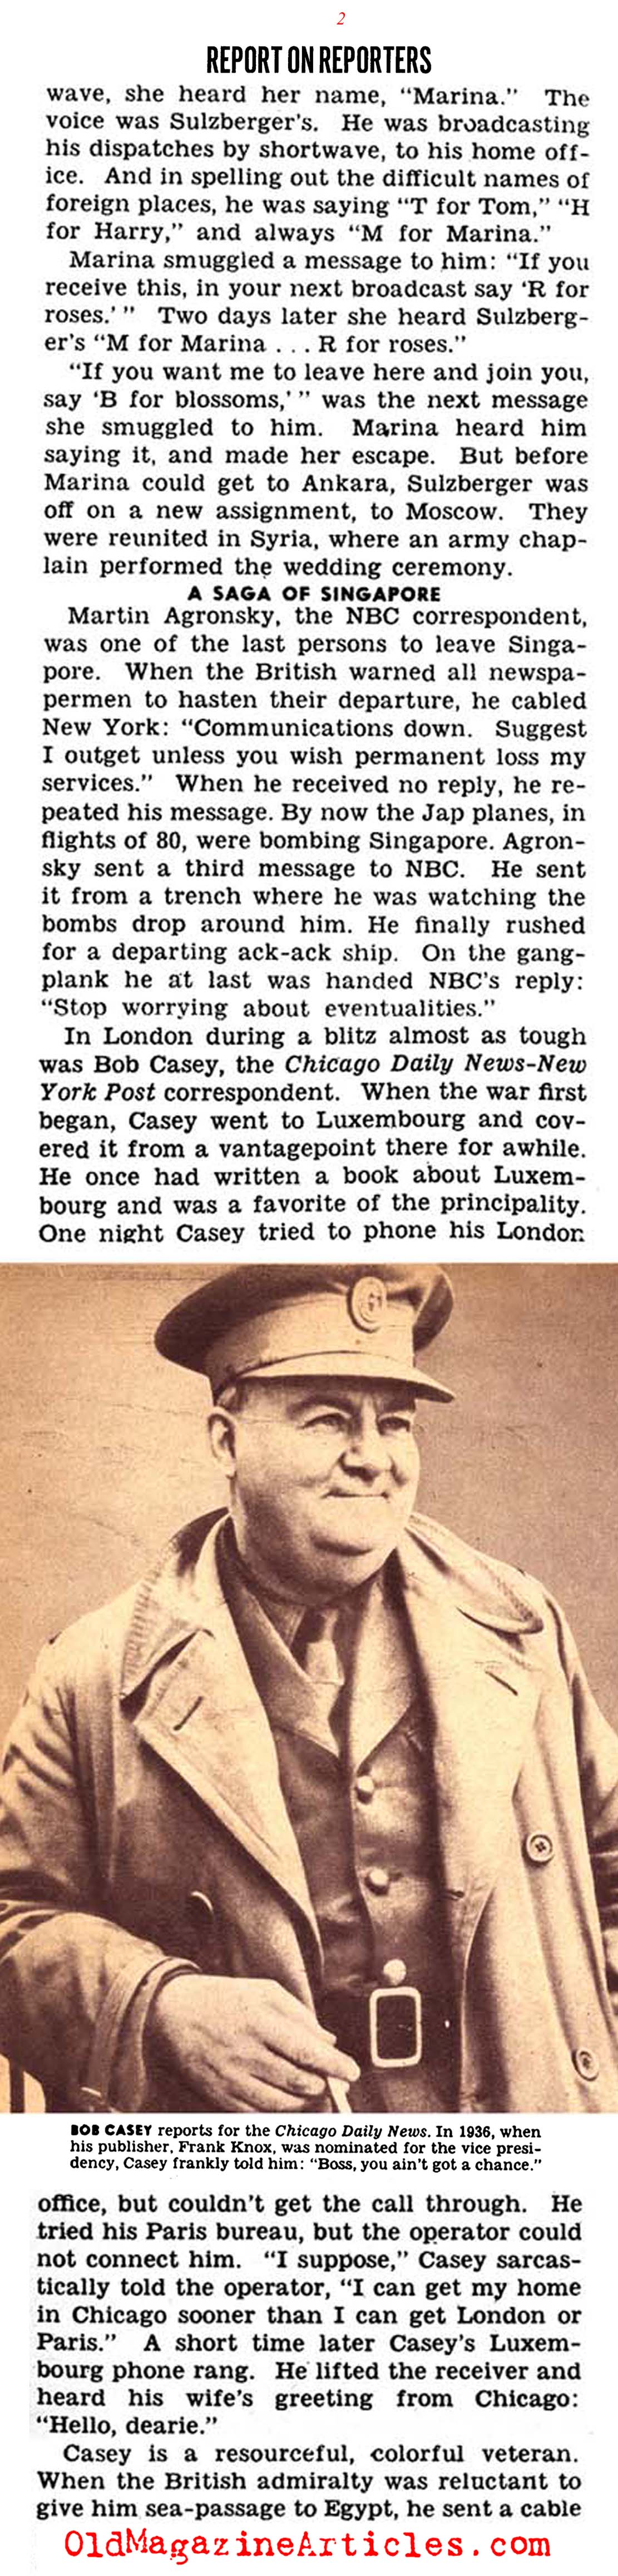 A Report on the War Reporters (Click Magazine, 1944)